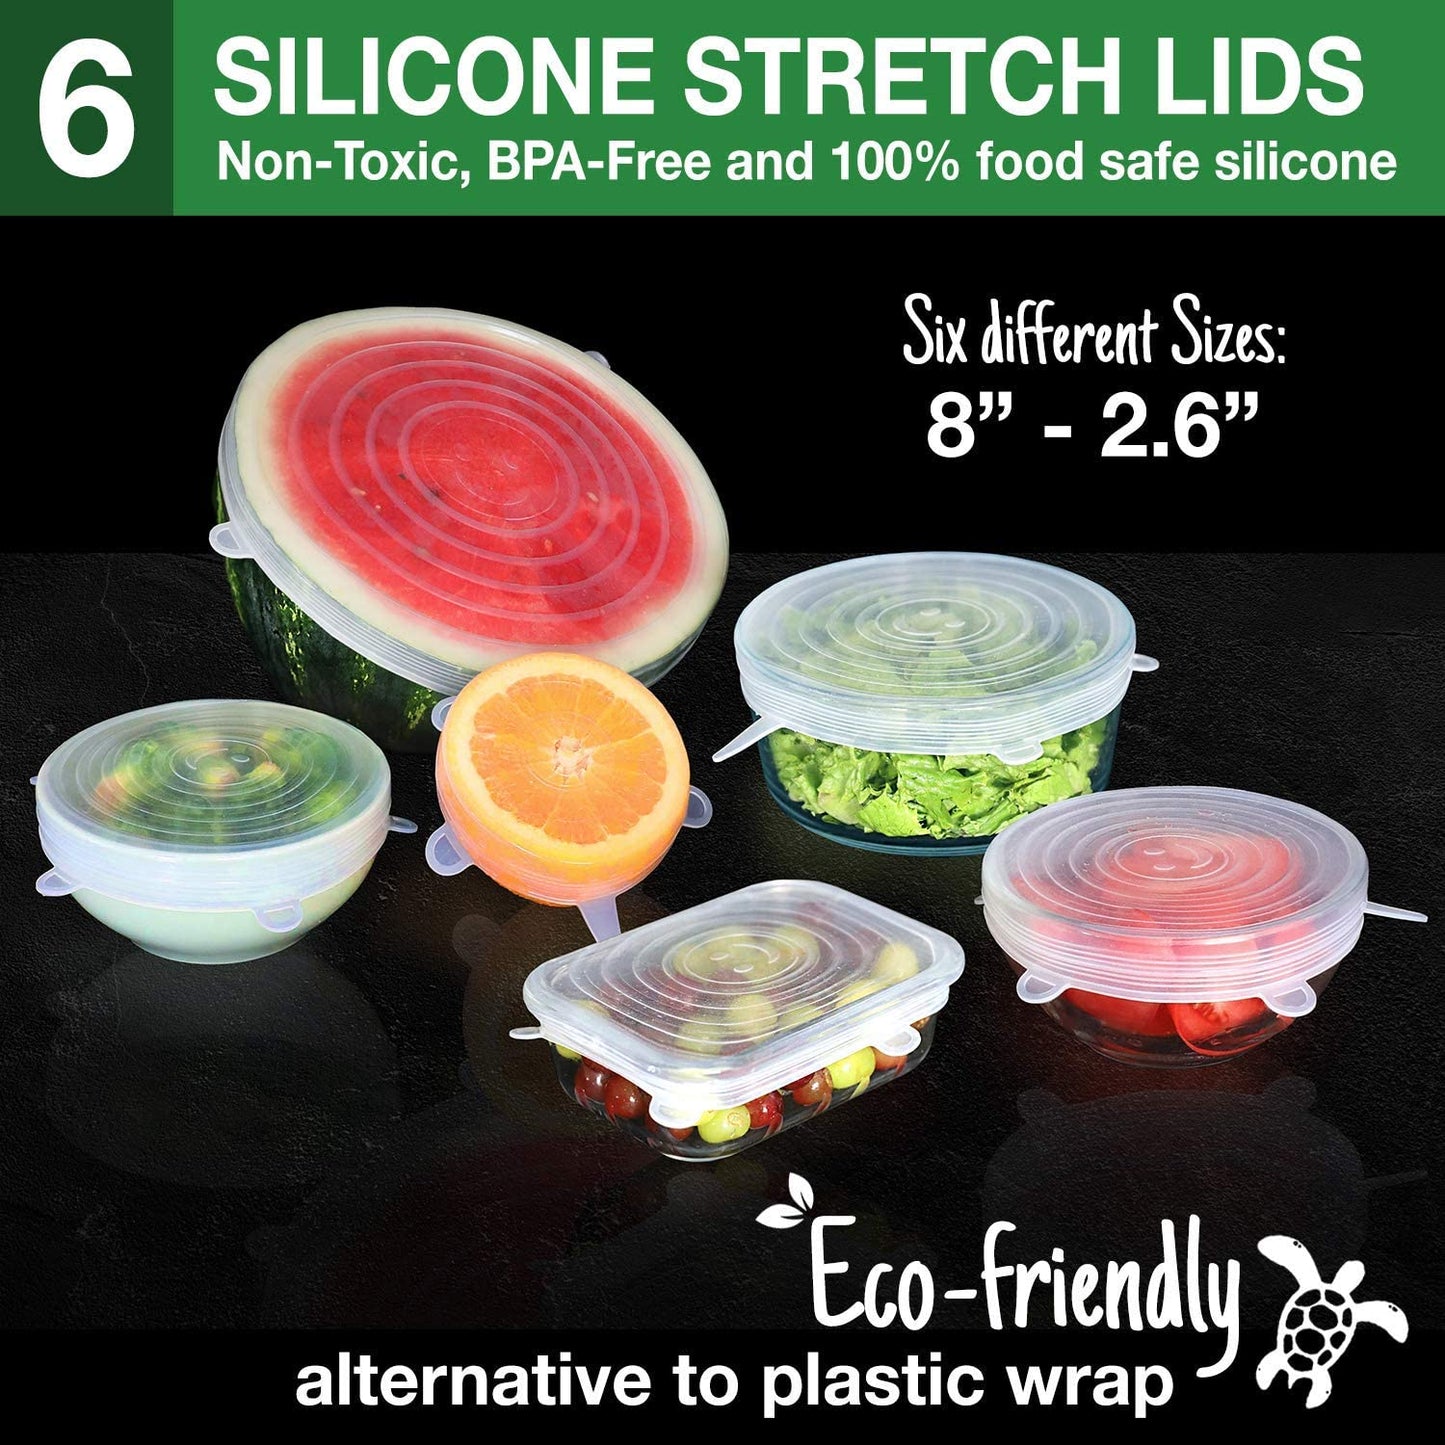 [17 Set] Food Storage Pack - Set of 4 Silicone Bags, 6 Stretchy Lids, 6 Produce Mesh Bags - Eco-Conscious Alternative to Plastic - Safe, Reusable Kitchen Solutions - with Bag Holder